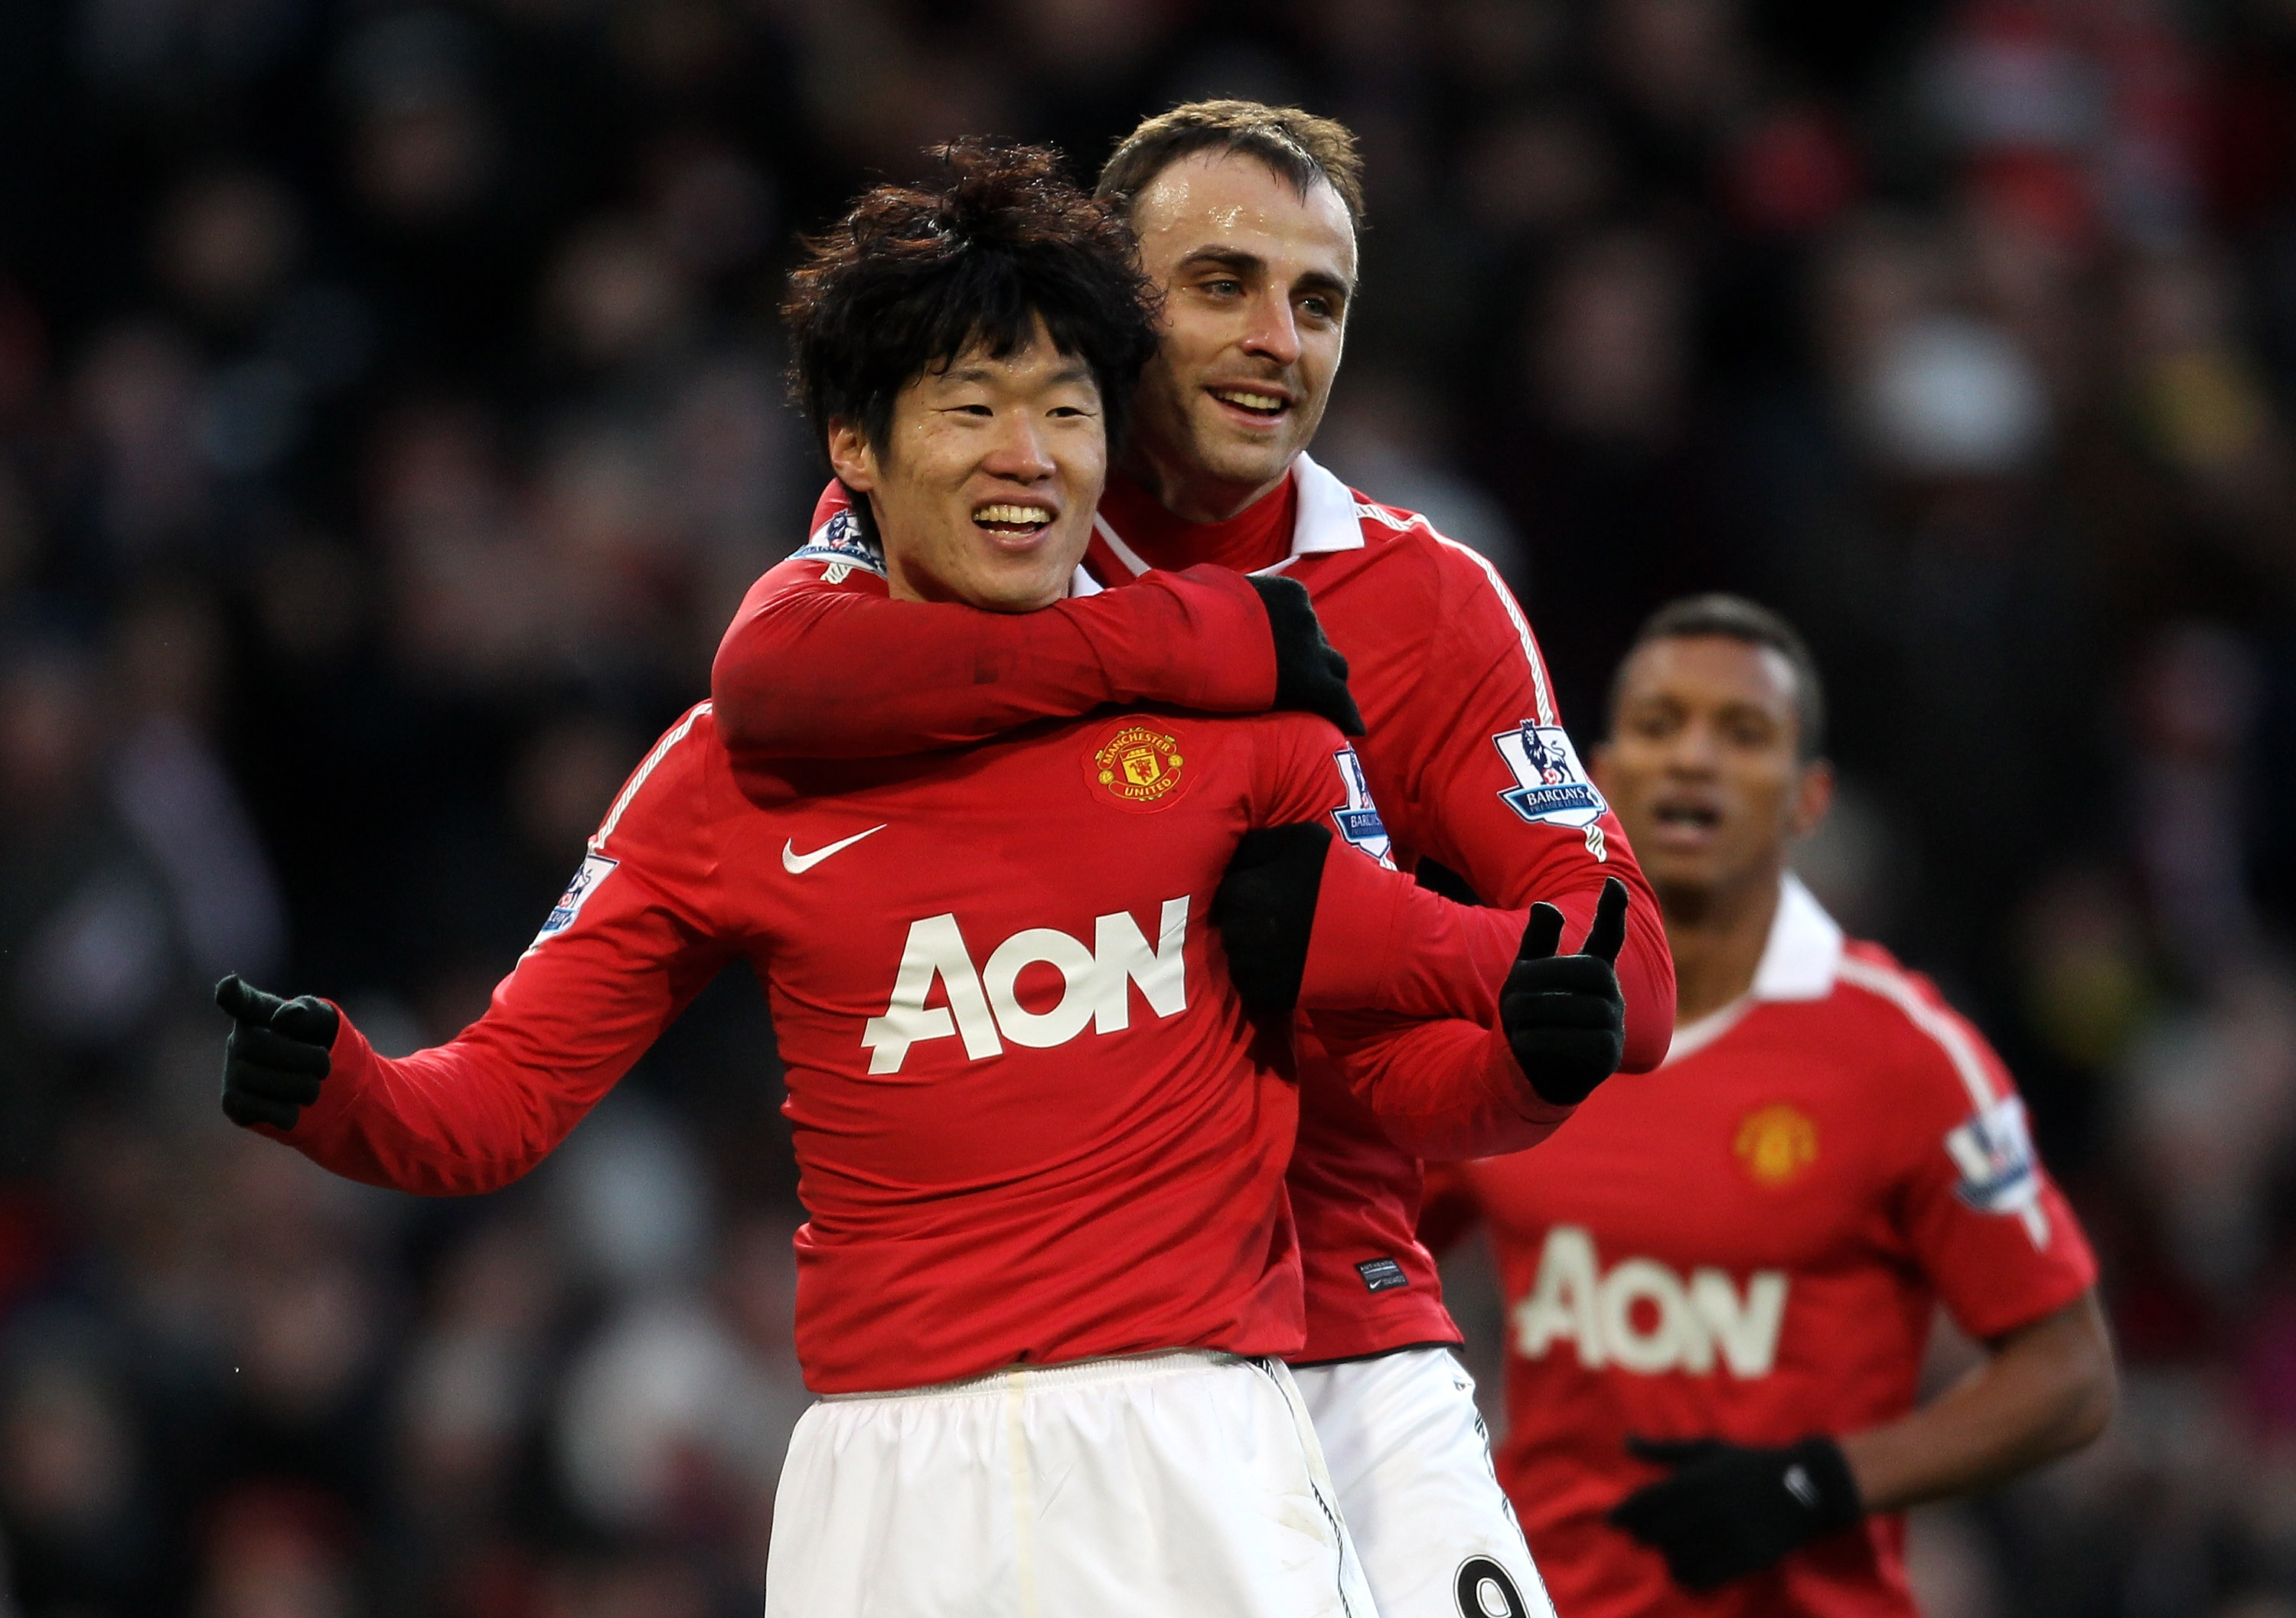 MANCHESTER, ENGLAND - NOVEMBER 27:  Ji-Sung Park (L) of Manchester United celebrates scoring his team's second goal with team mate Dimitar Berbatov  during the Barclays Premier League match between Manchester United and Blackburn Rovers at Old Trafford on